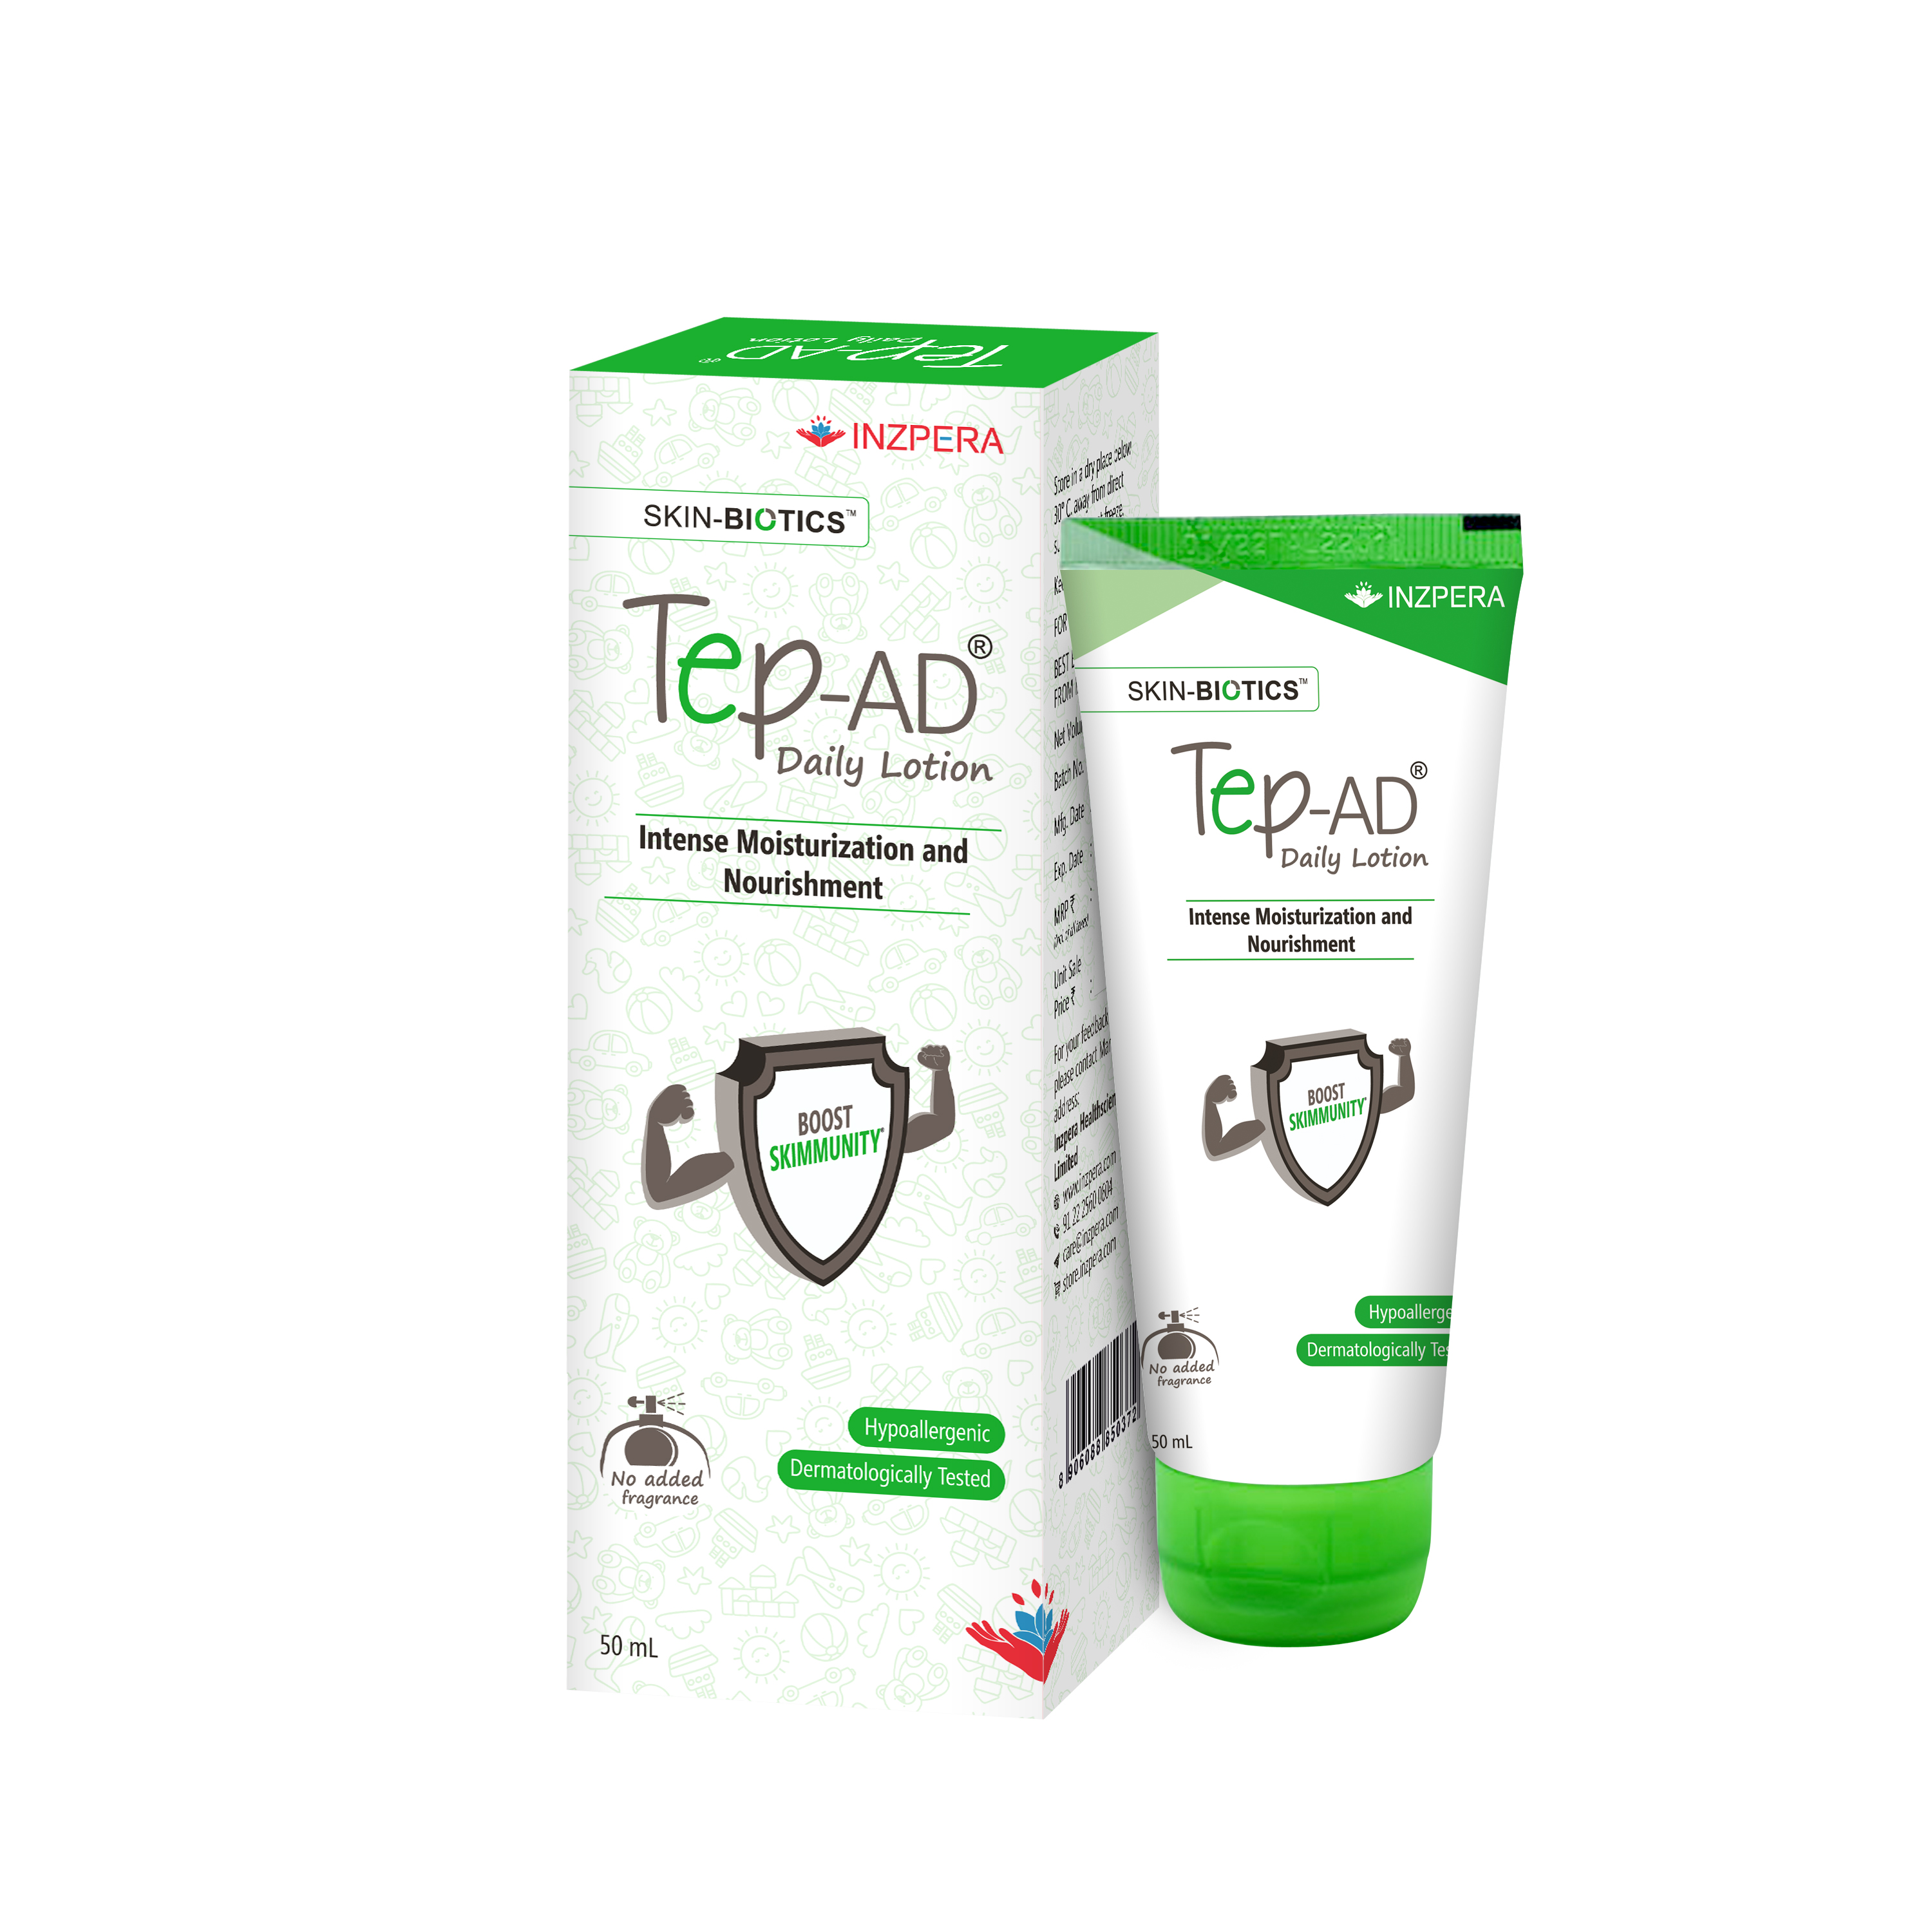 TEP-AD DAILY LOTION (50ML)